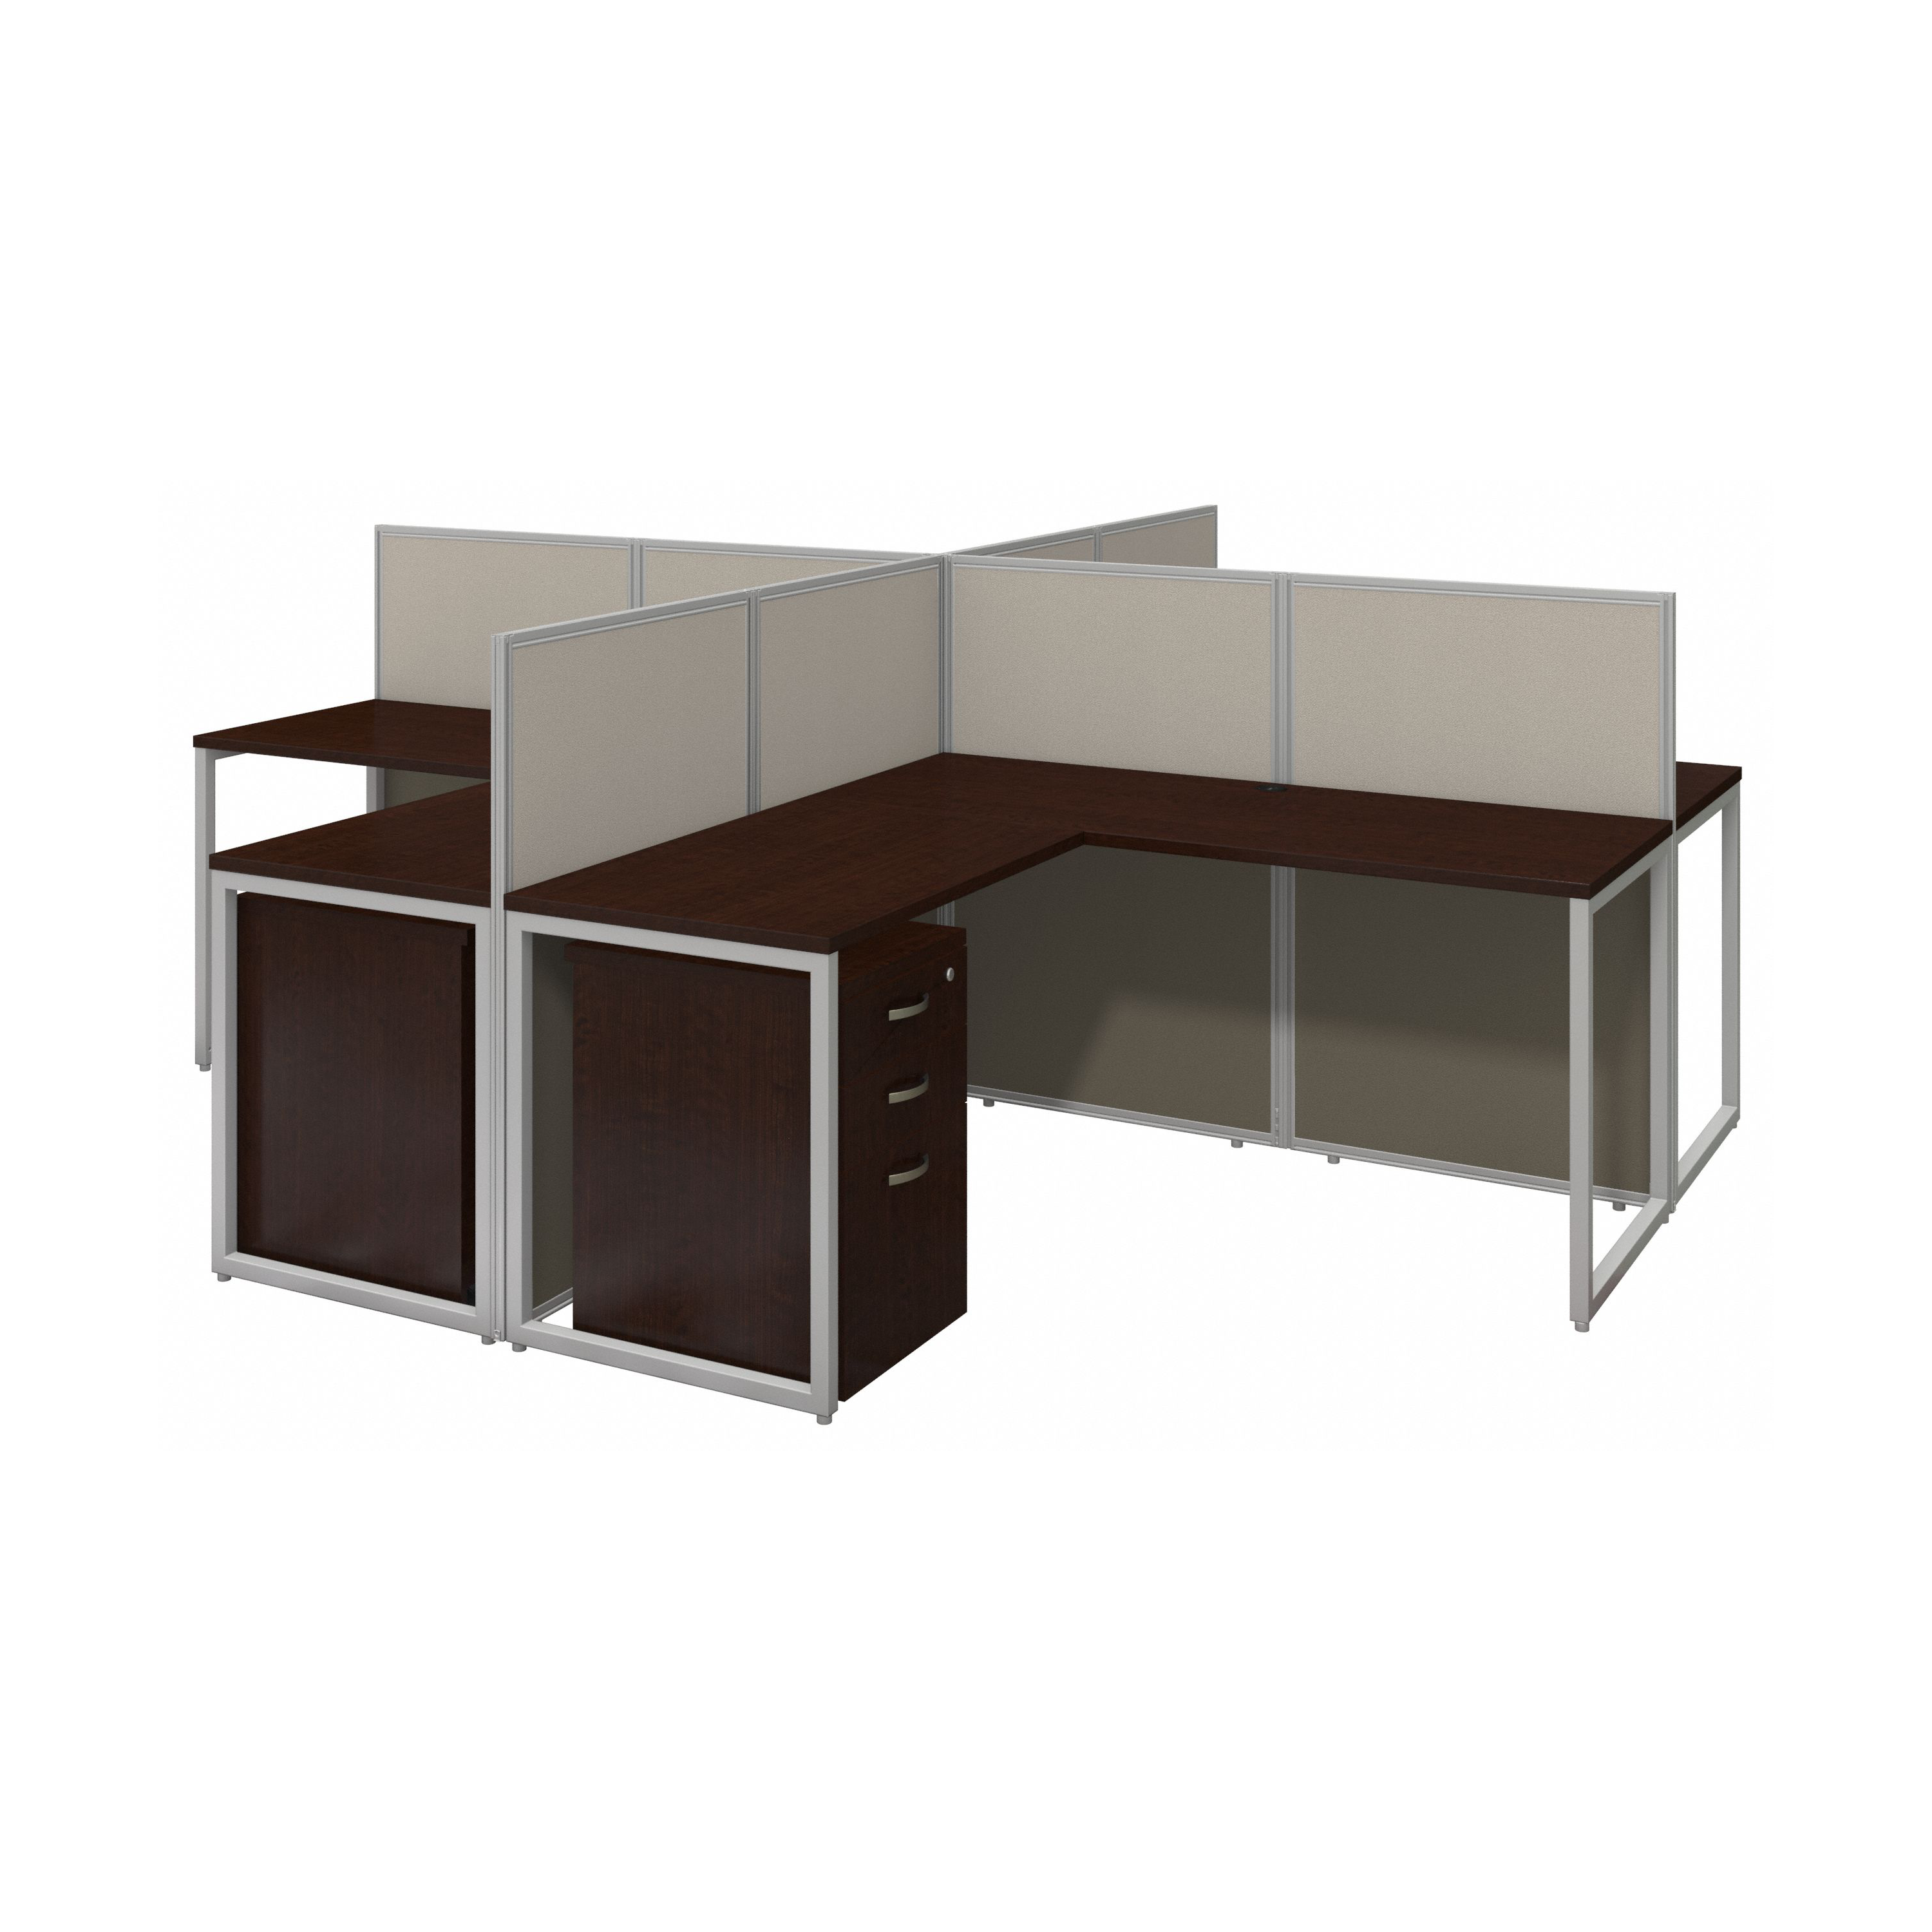 Shop Bush Business Furniture Easy Office 60W 4 Person L Shaped Cubicle Desk with Drawers and 45H Panels 02 EOD760SMR-03K #color_mocha cherry